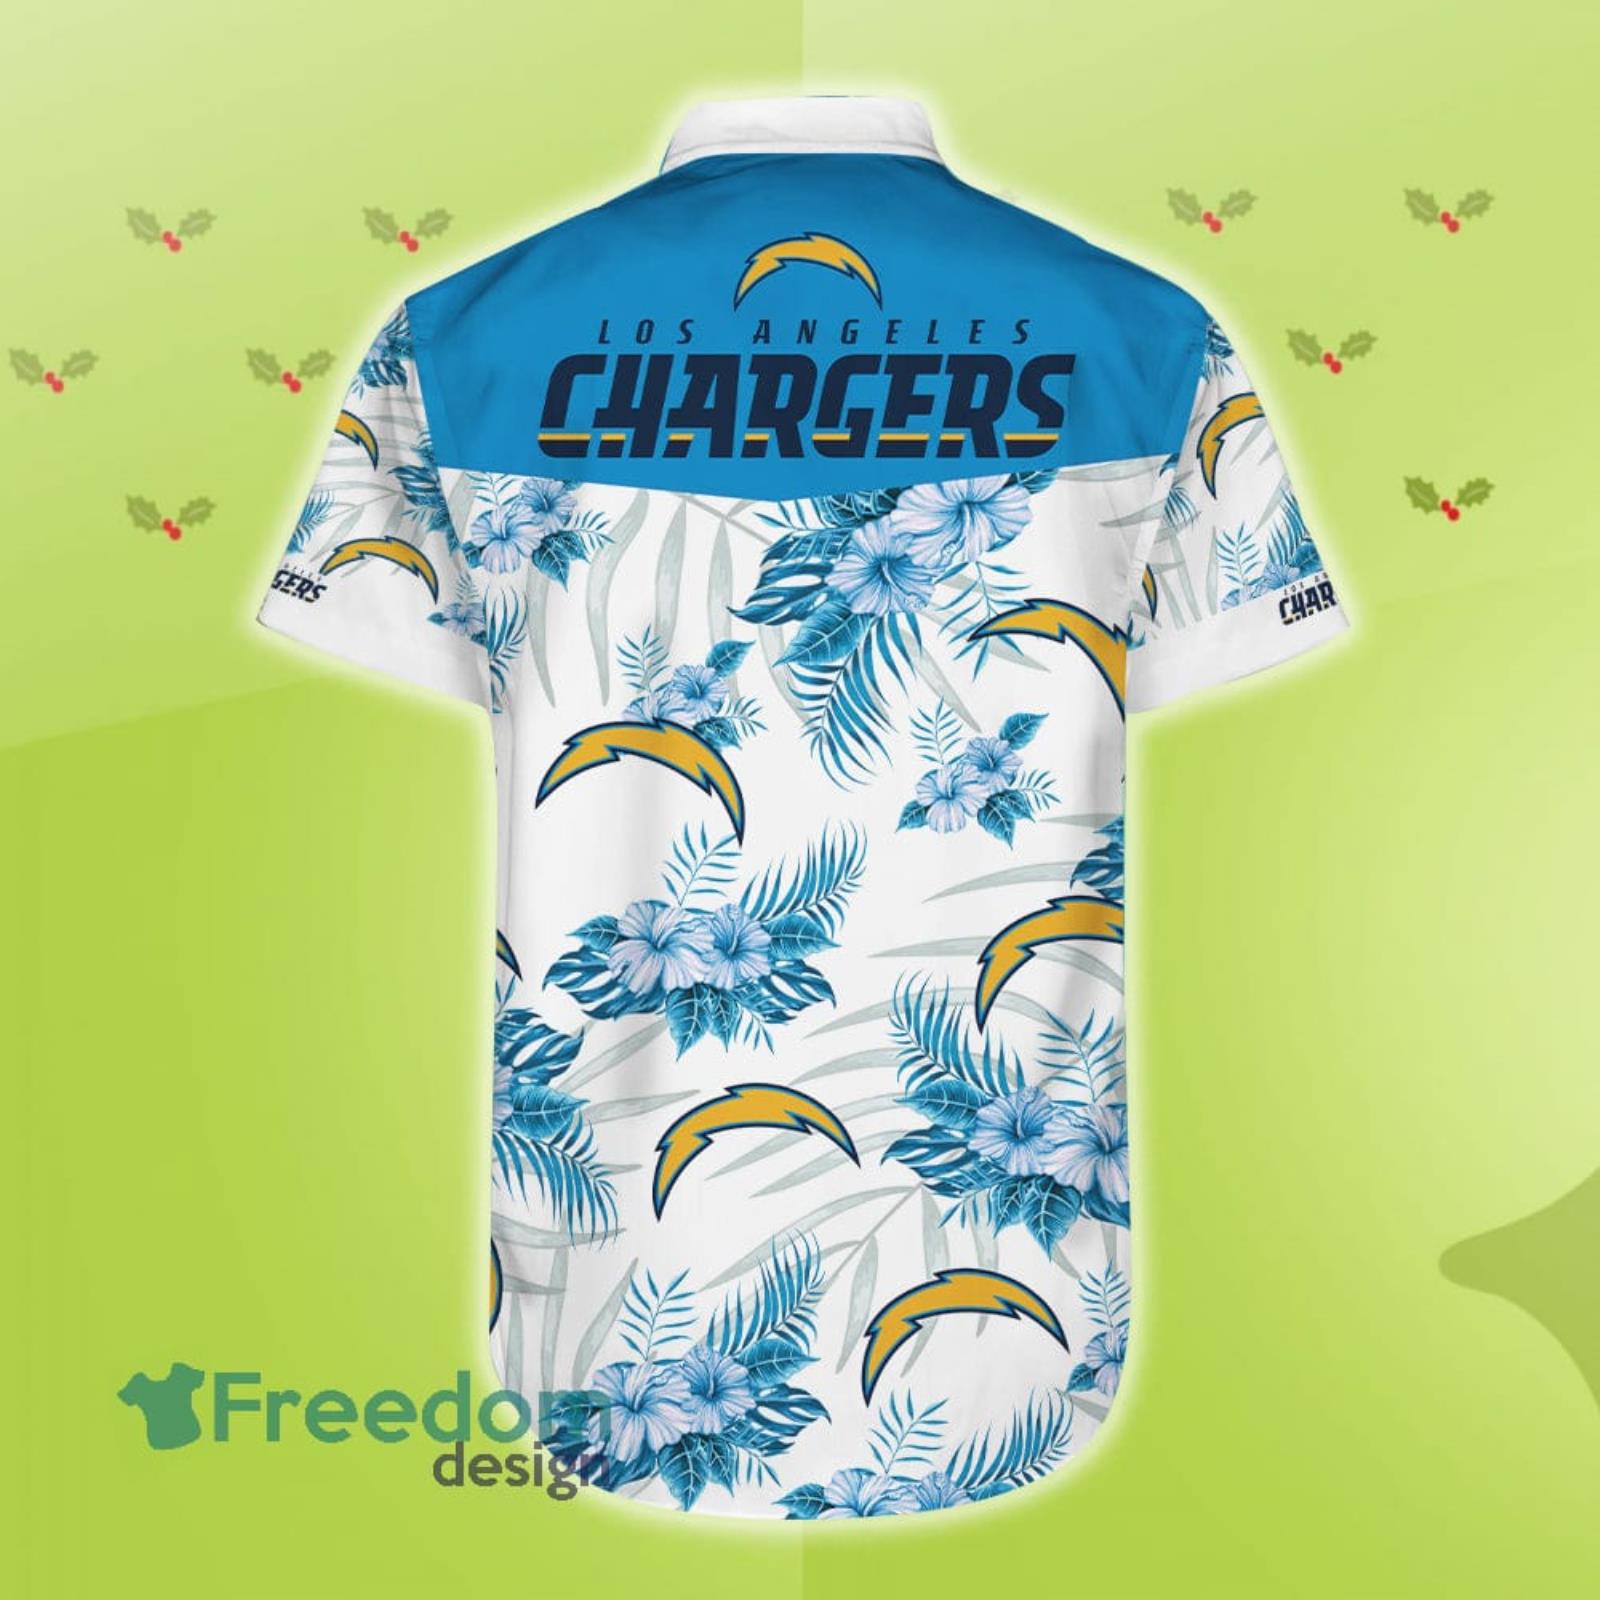 : Los Angeles Chargers Shirt